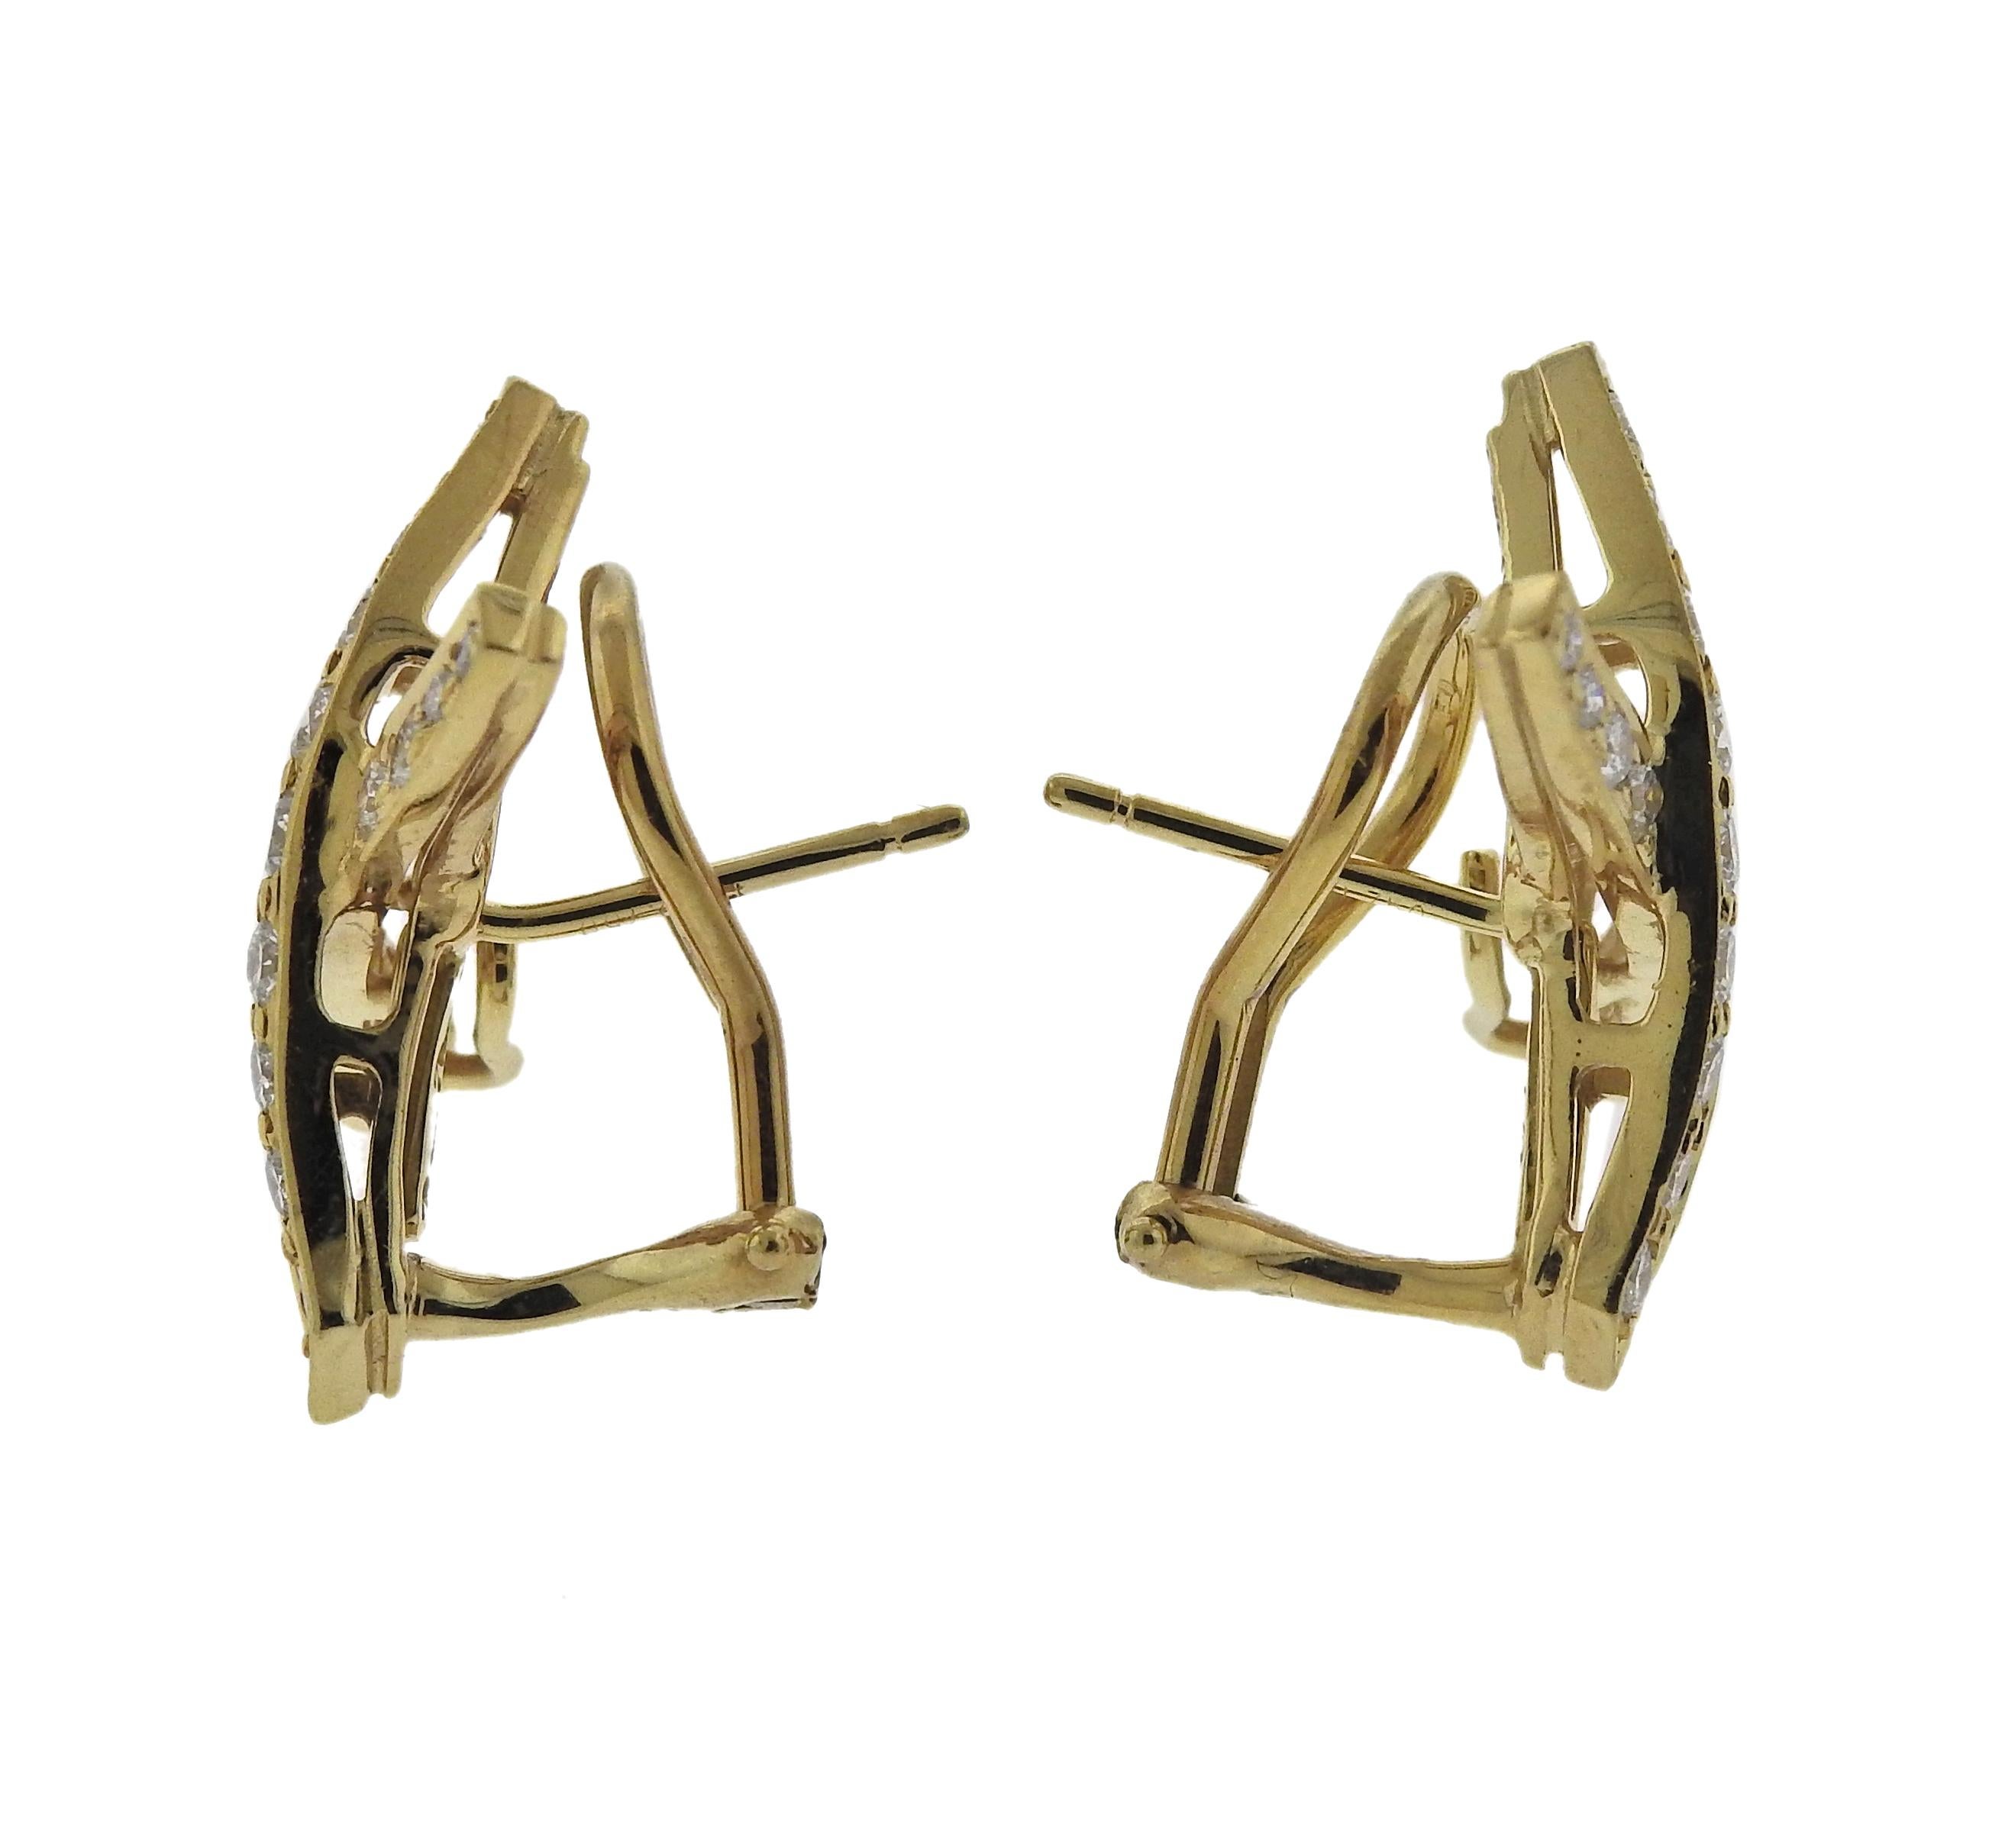 18k gold classic X earrings, crafted by Paloma Picasso for Tiffany & Co, set with approx. 1.10ctw in G/VS diamonds.  Earrings are 19mm x 16mm, weigh 7.2 grams. Marked: Tiffany & Co, Paloma Picasso, 1985, 750.